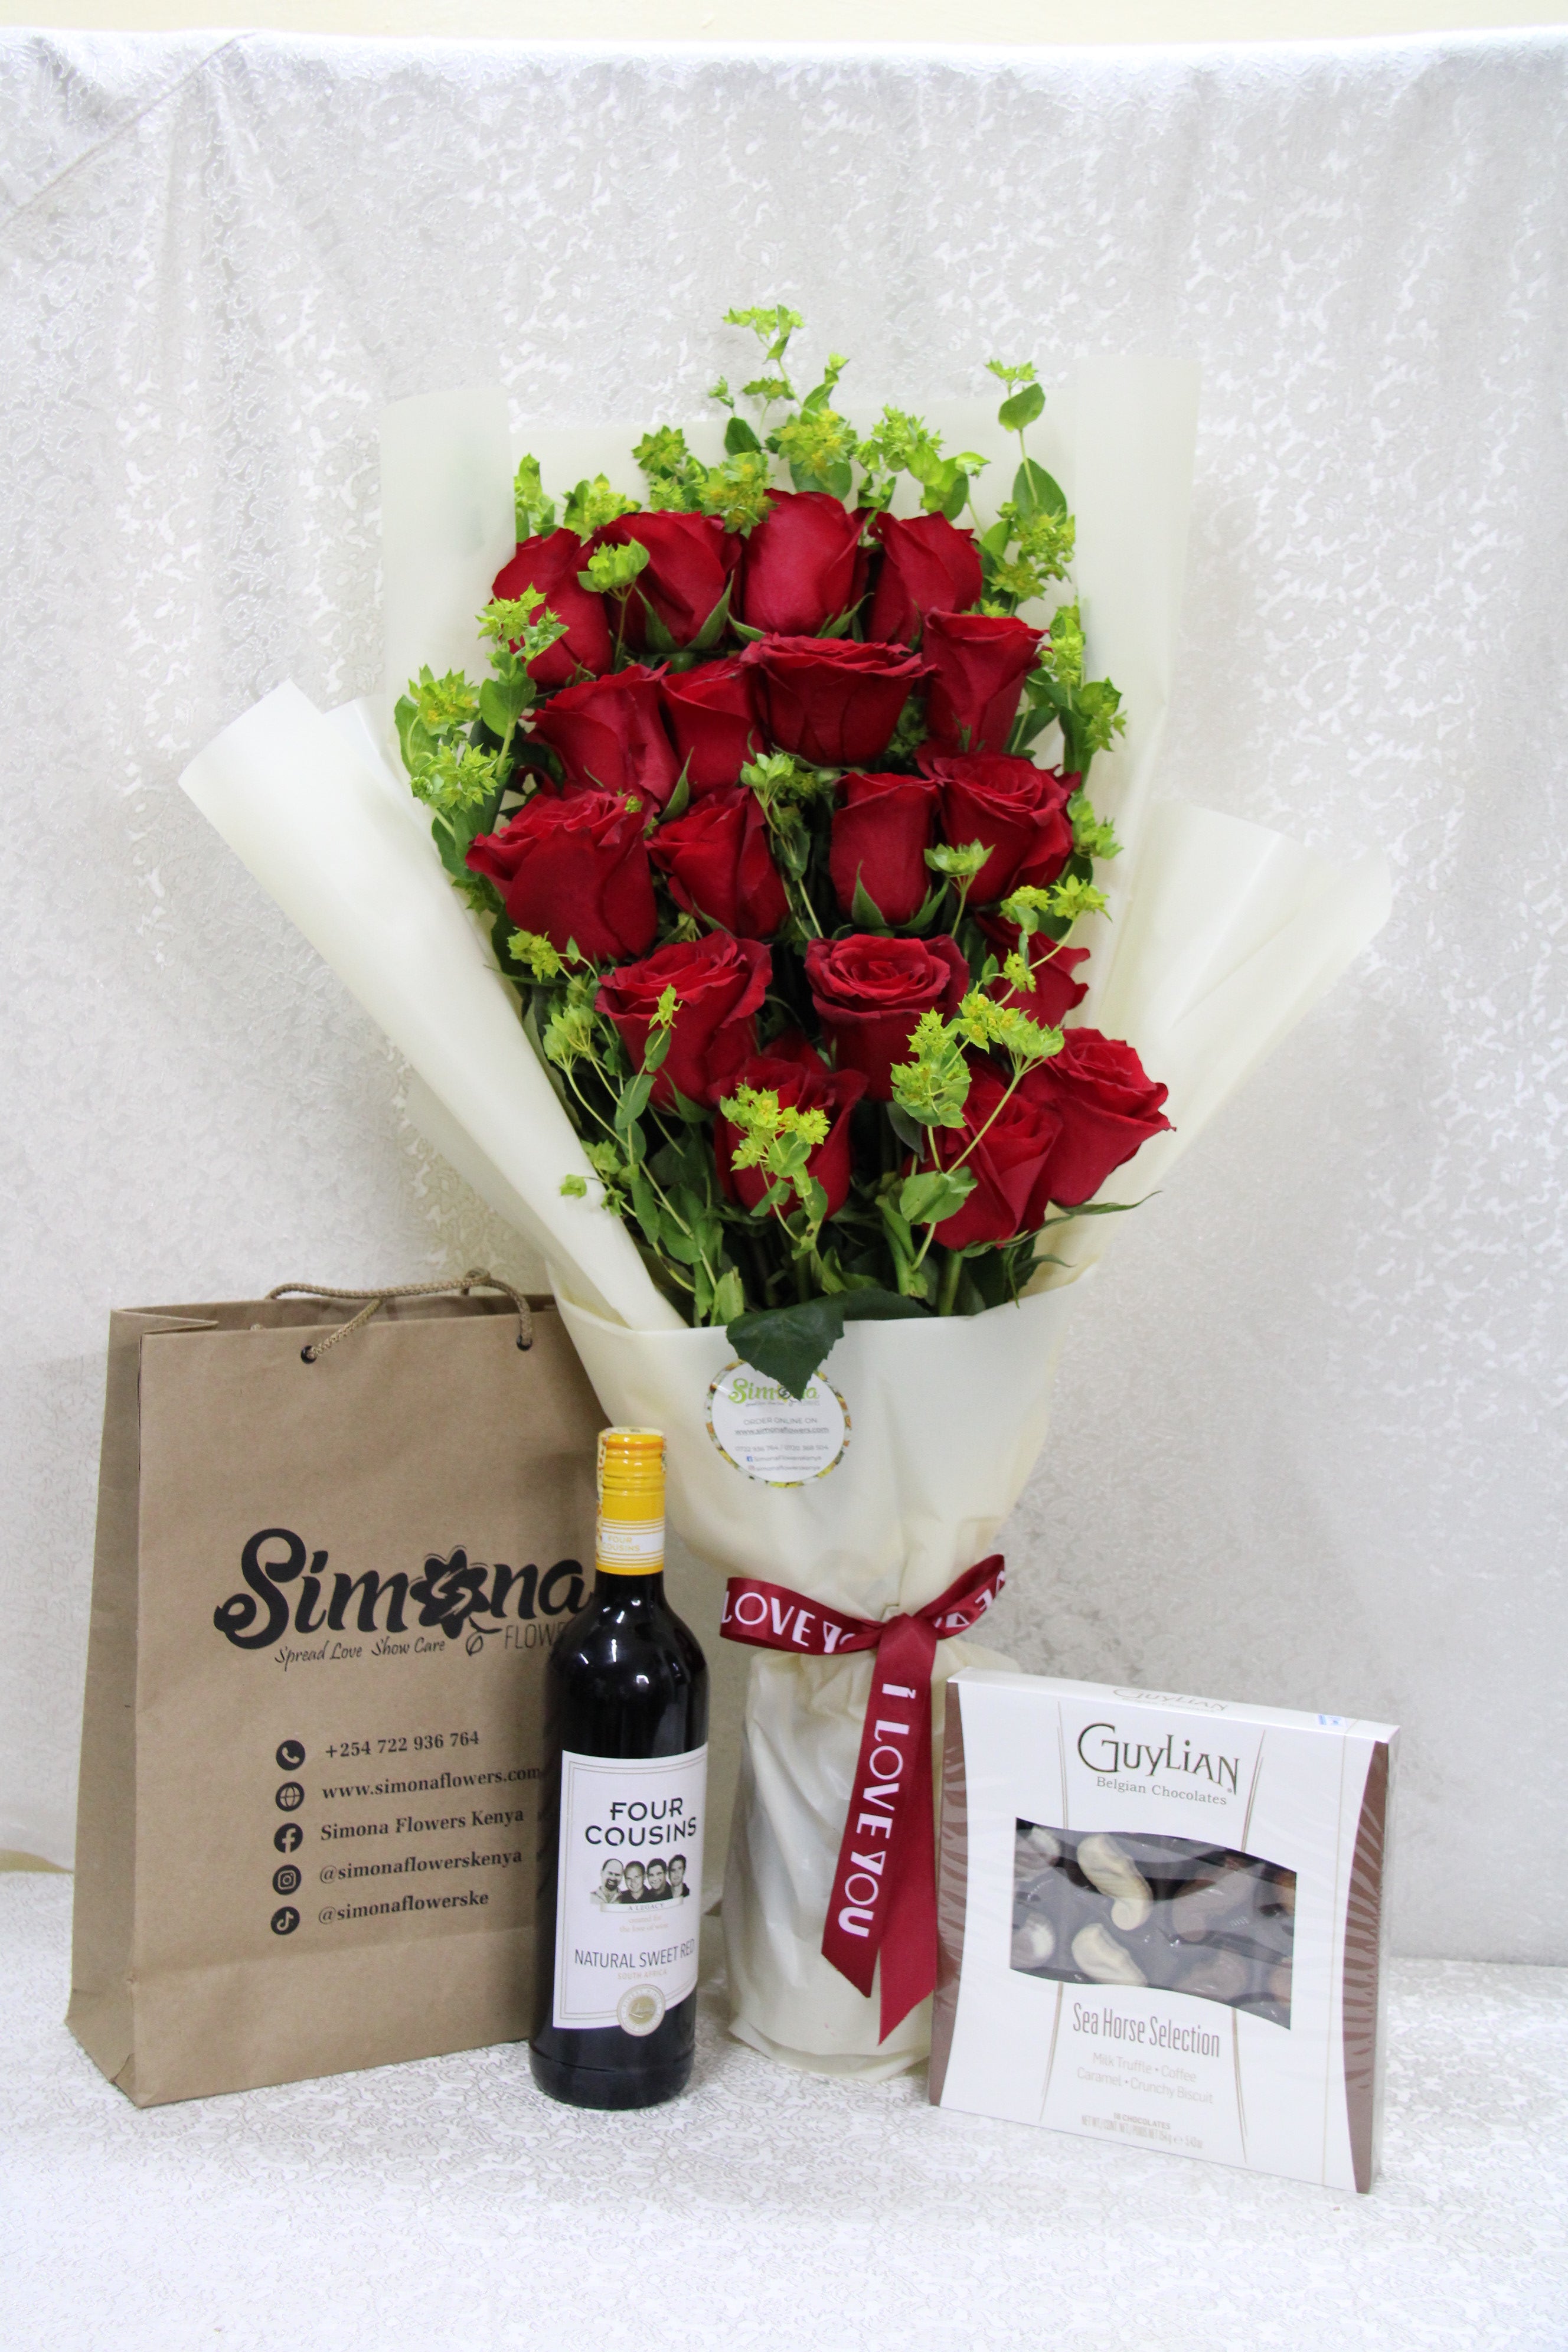 Adorable roses bouquet with wine and chocolate